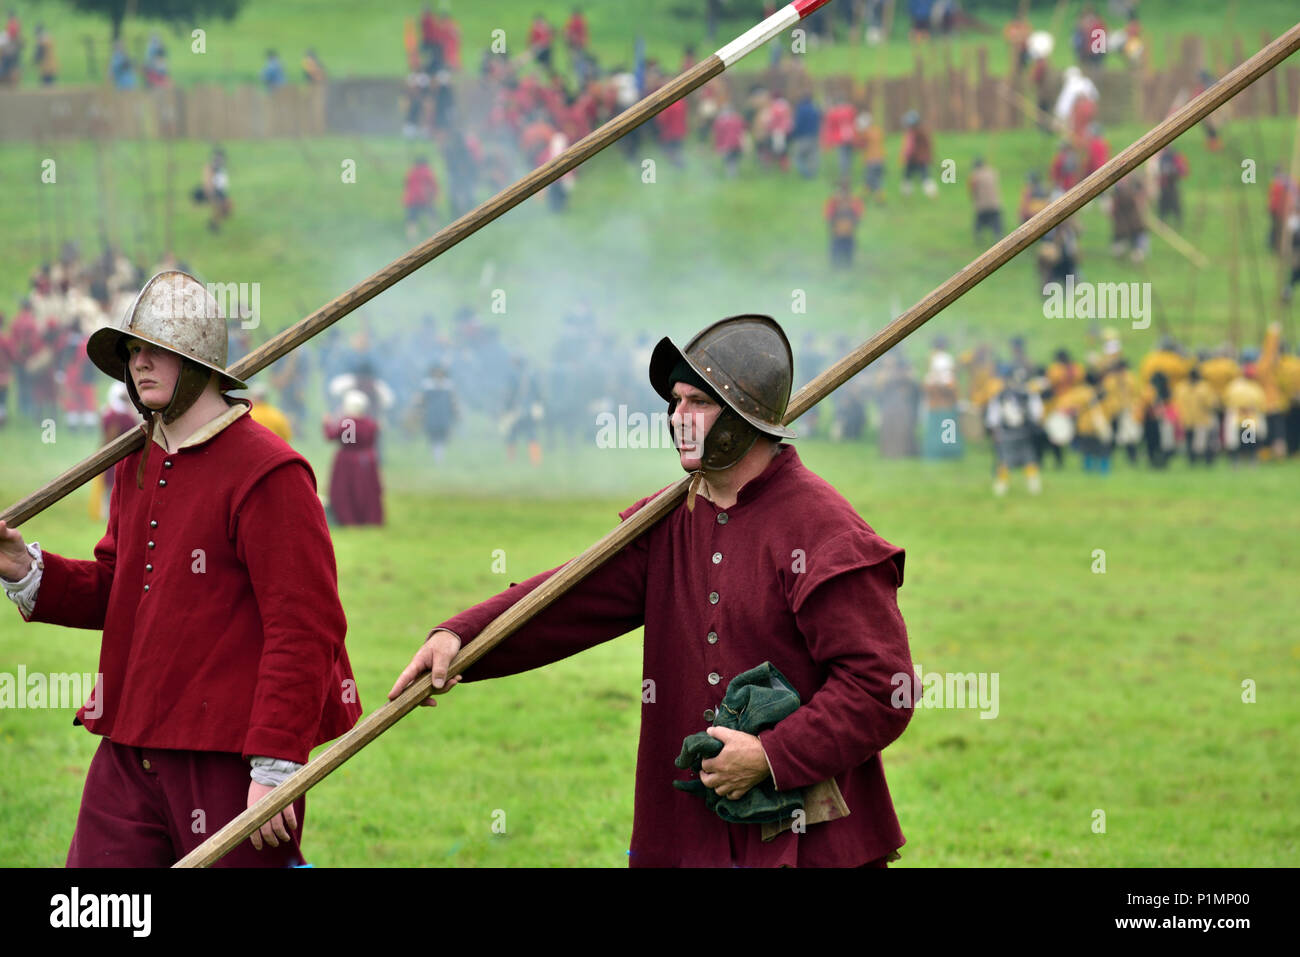 Two pikemen foot soldiers carrying their pikes in 17th century custom in English Civil War reenactment Stock Photo